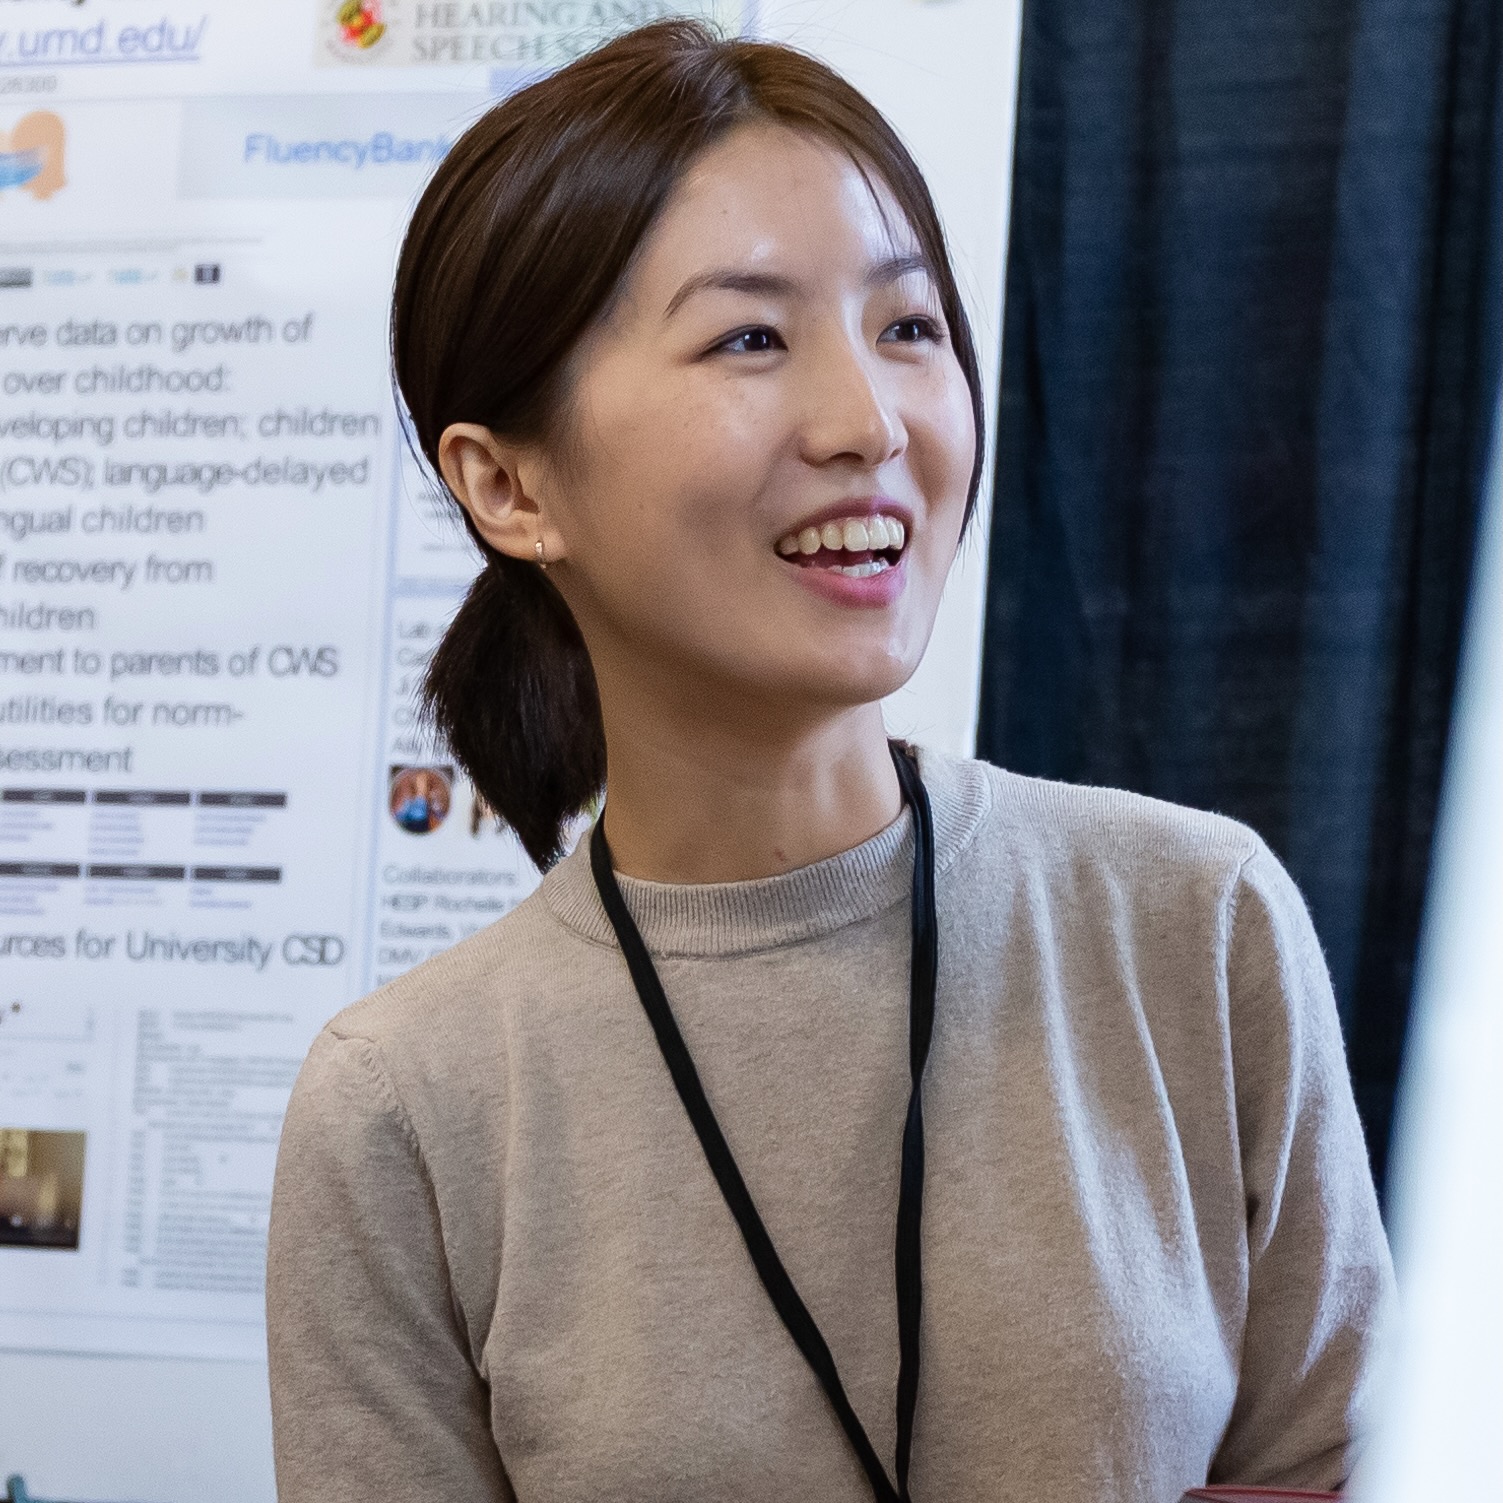 Photo of a young woman smiling broadly as she presents her research.